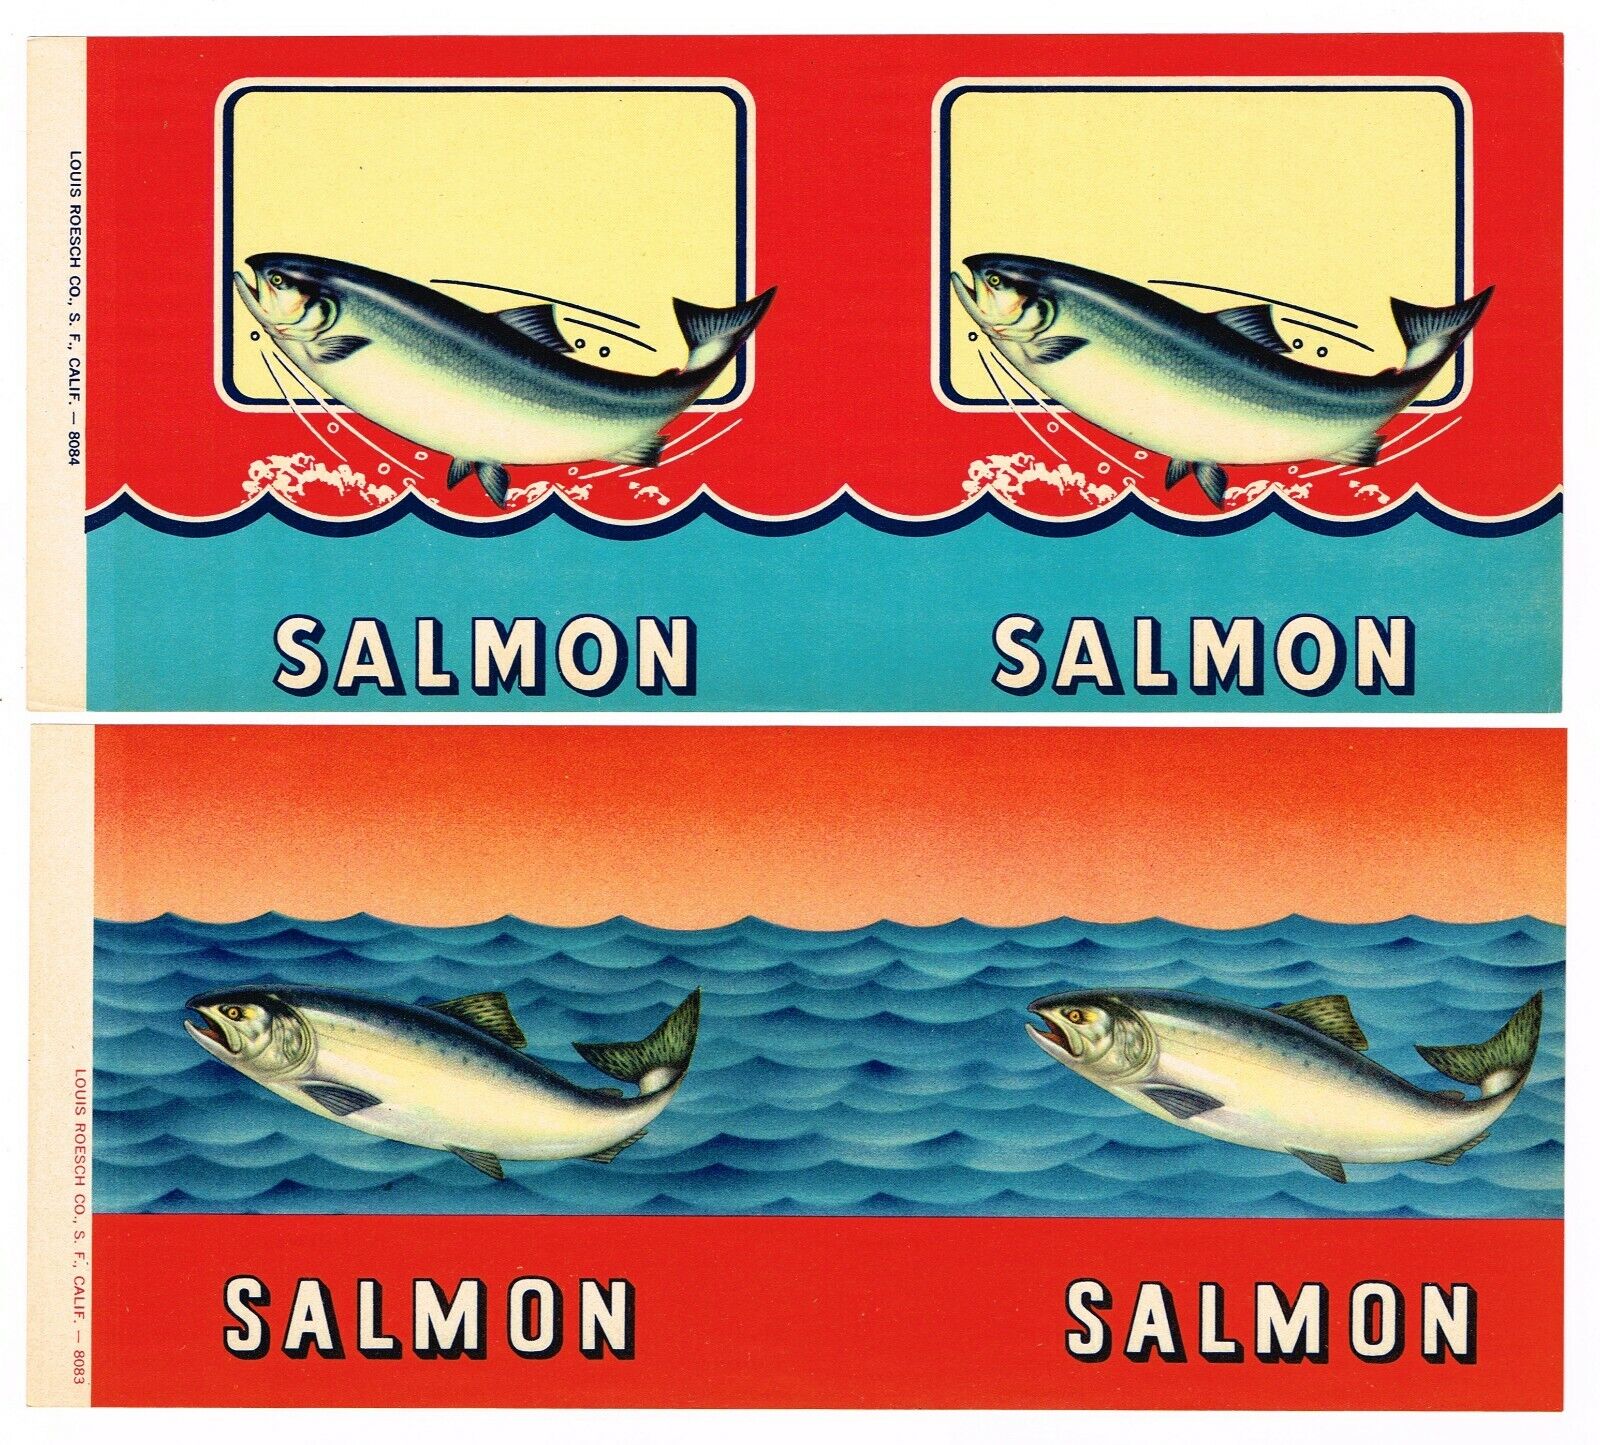 2 DIFFERENT ORIGINAL 1940S CAN LABELS VINTAGE SALMON FISH ADVERTISING STOCK